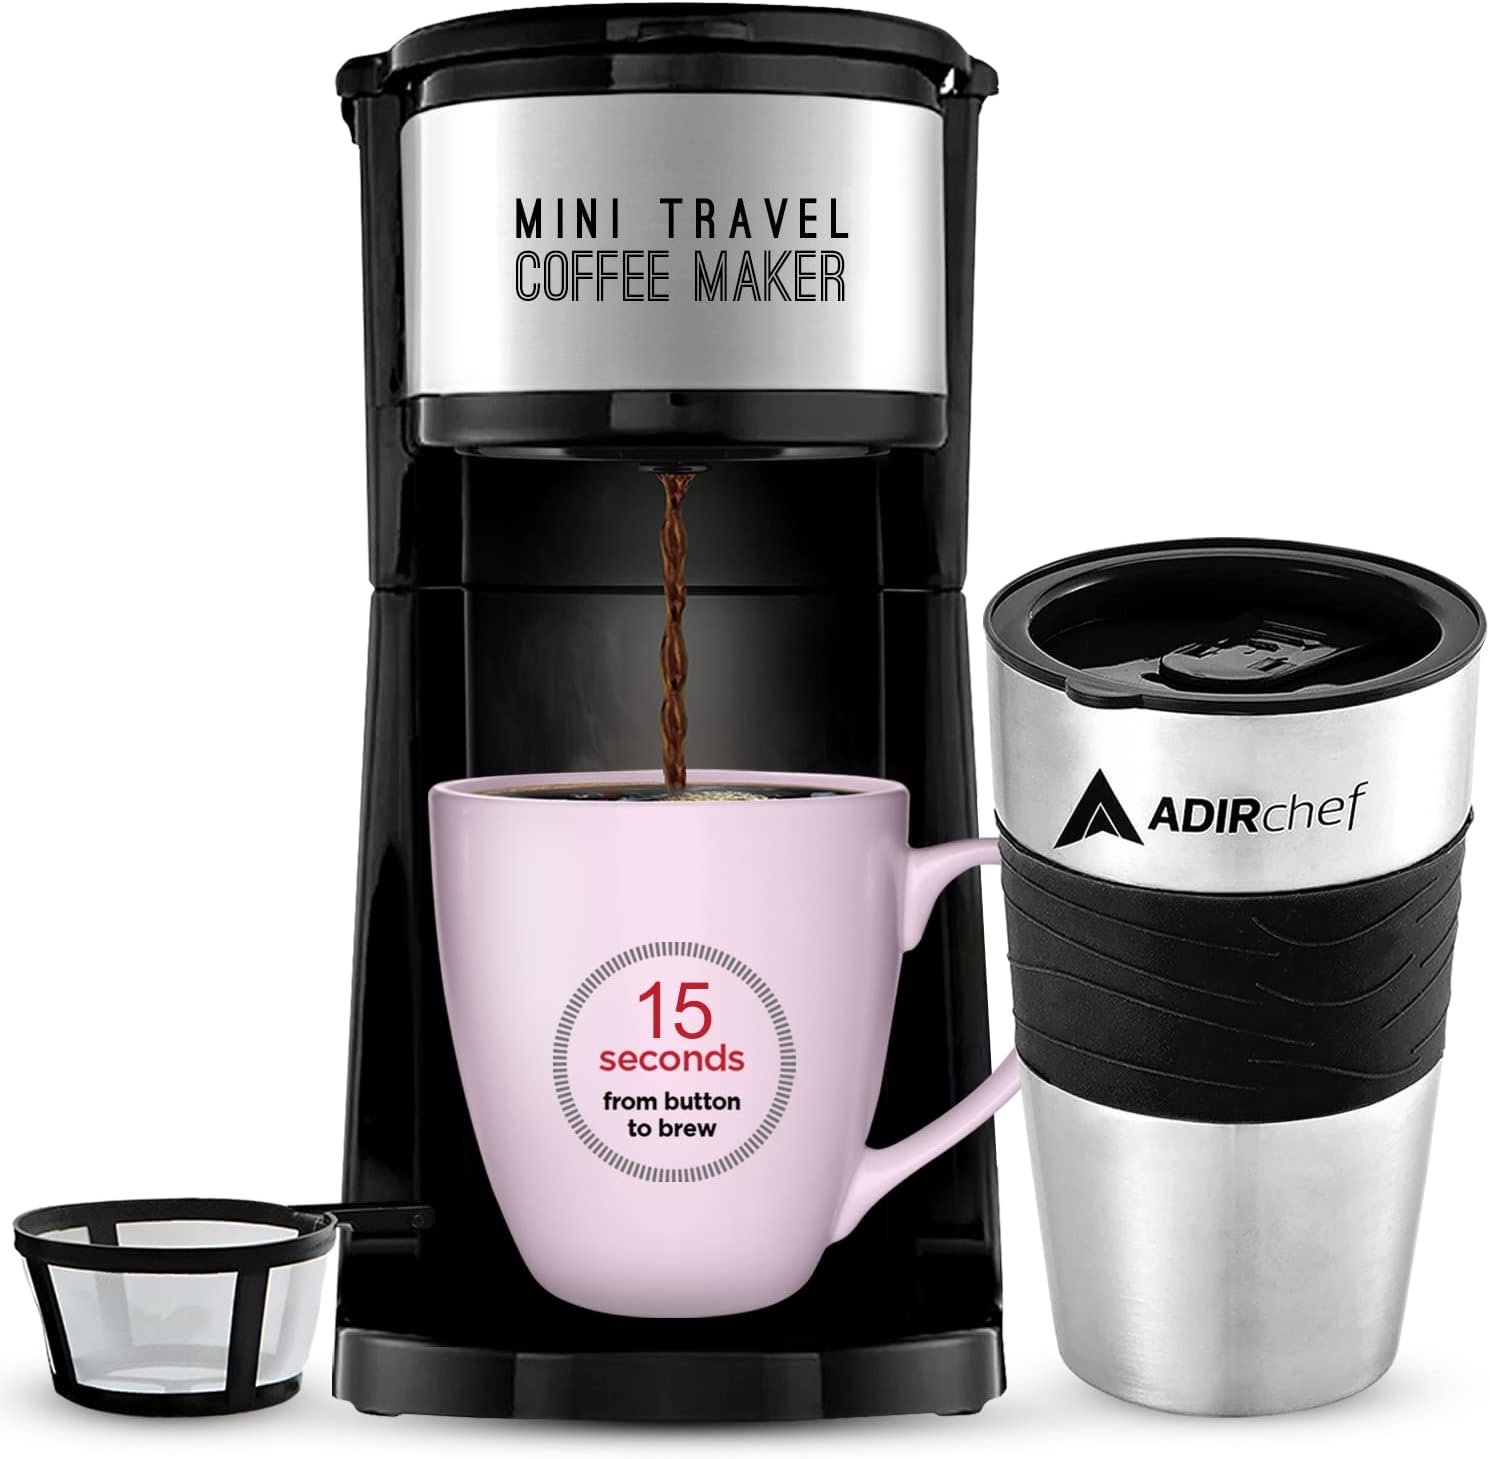 AdirChef Mini Travel Single Serve Coffee Maker  15 oz. Travel Mug Coffee Tumbler  Reusable Filter for Home, Office, Camping, Portable Small and Compact for Fathers Day (Black)